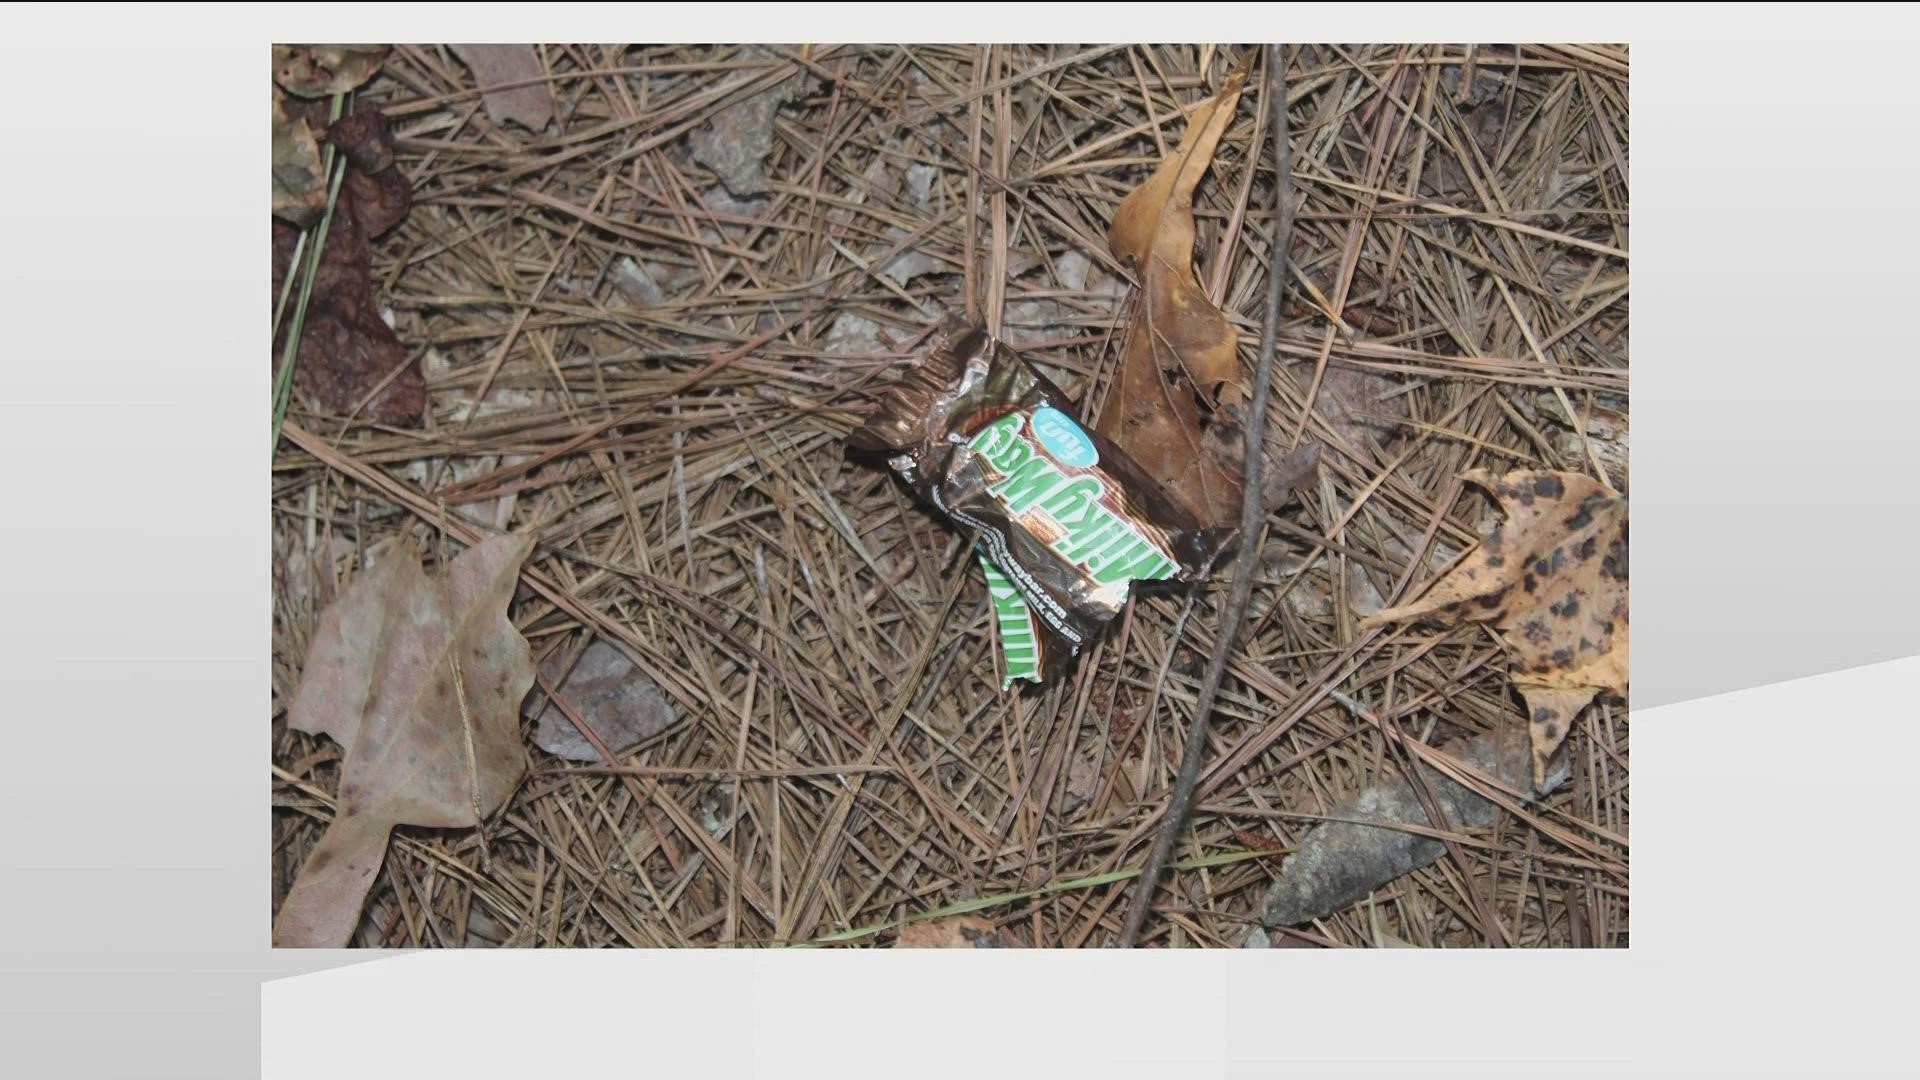 Suspects left behind a trail of fun-sized Milky Way's, satisfying their cravings for sweets on a nearby trail.